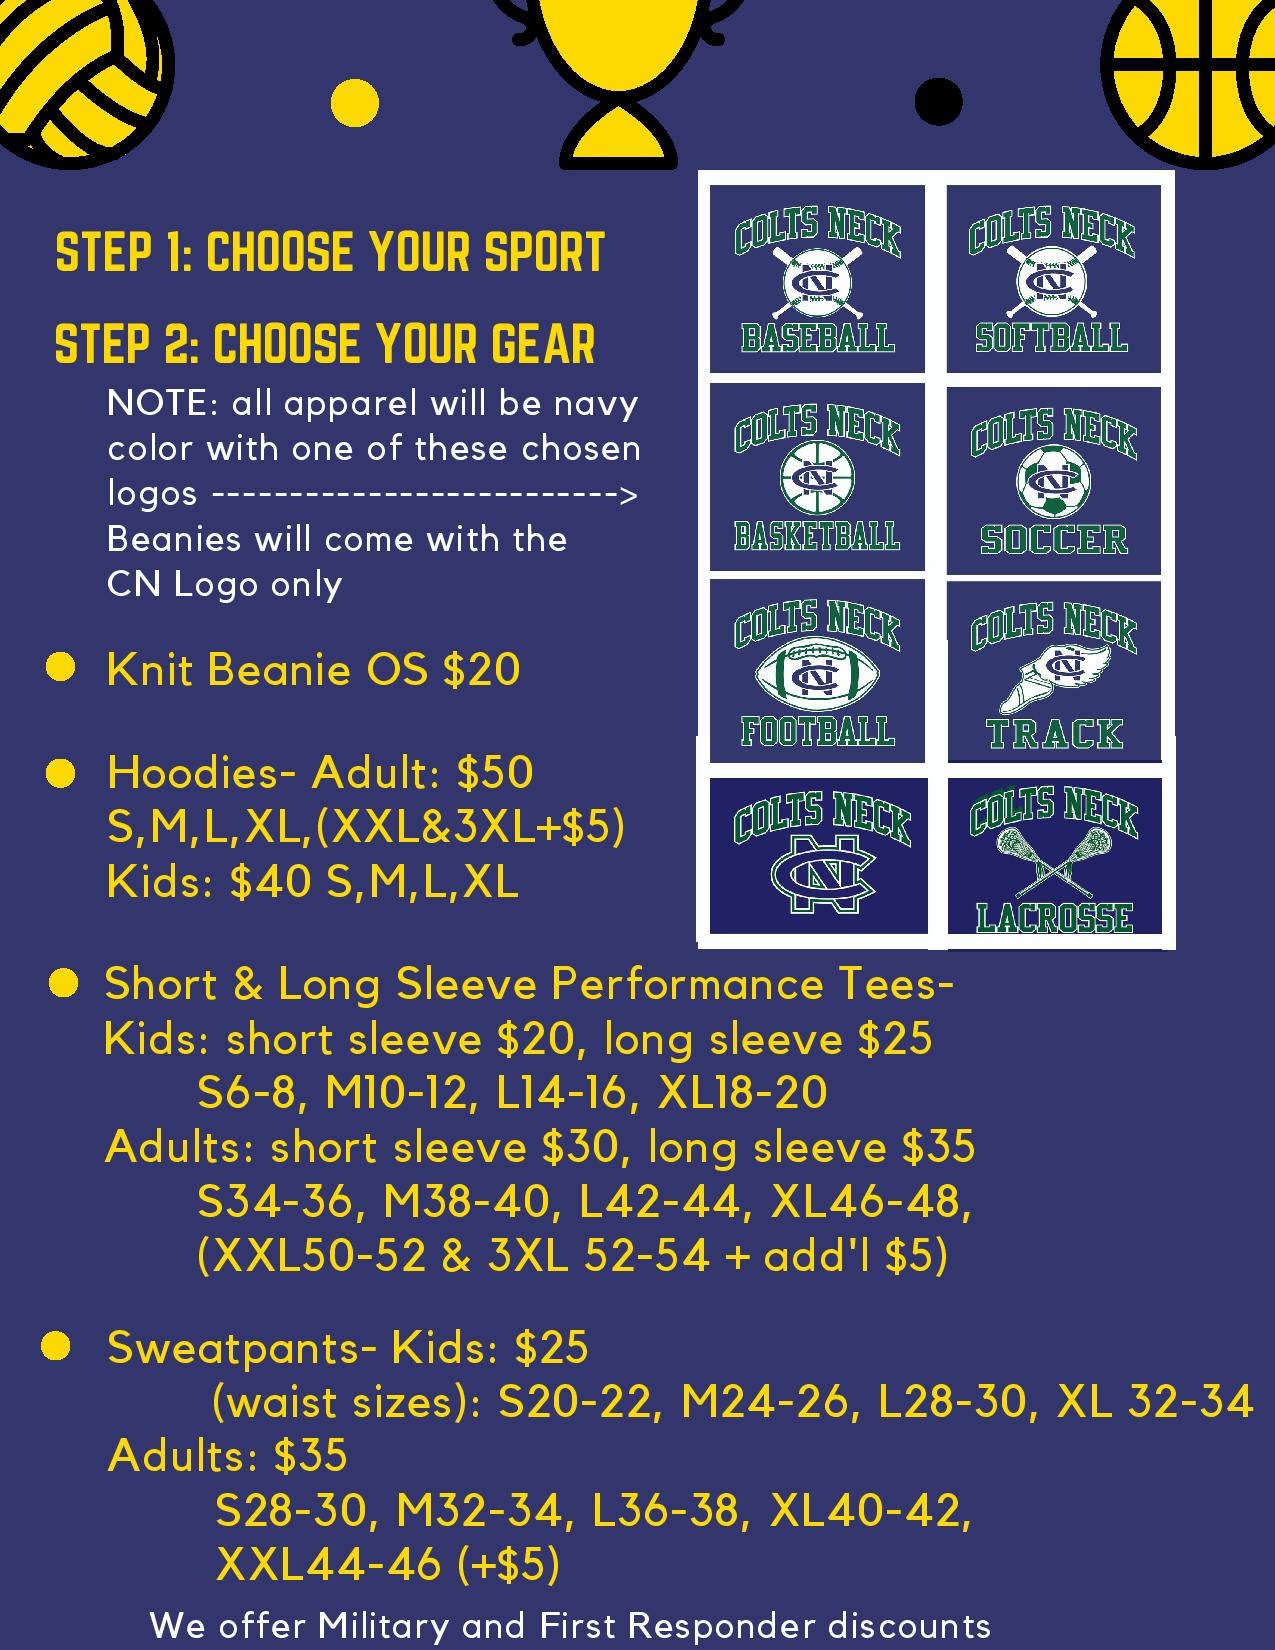 FINAL UPDATED 11-20-20 The Colts Neck Sports Foundation Apparel sale-page-002